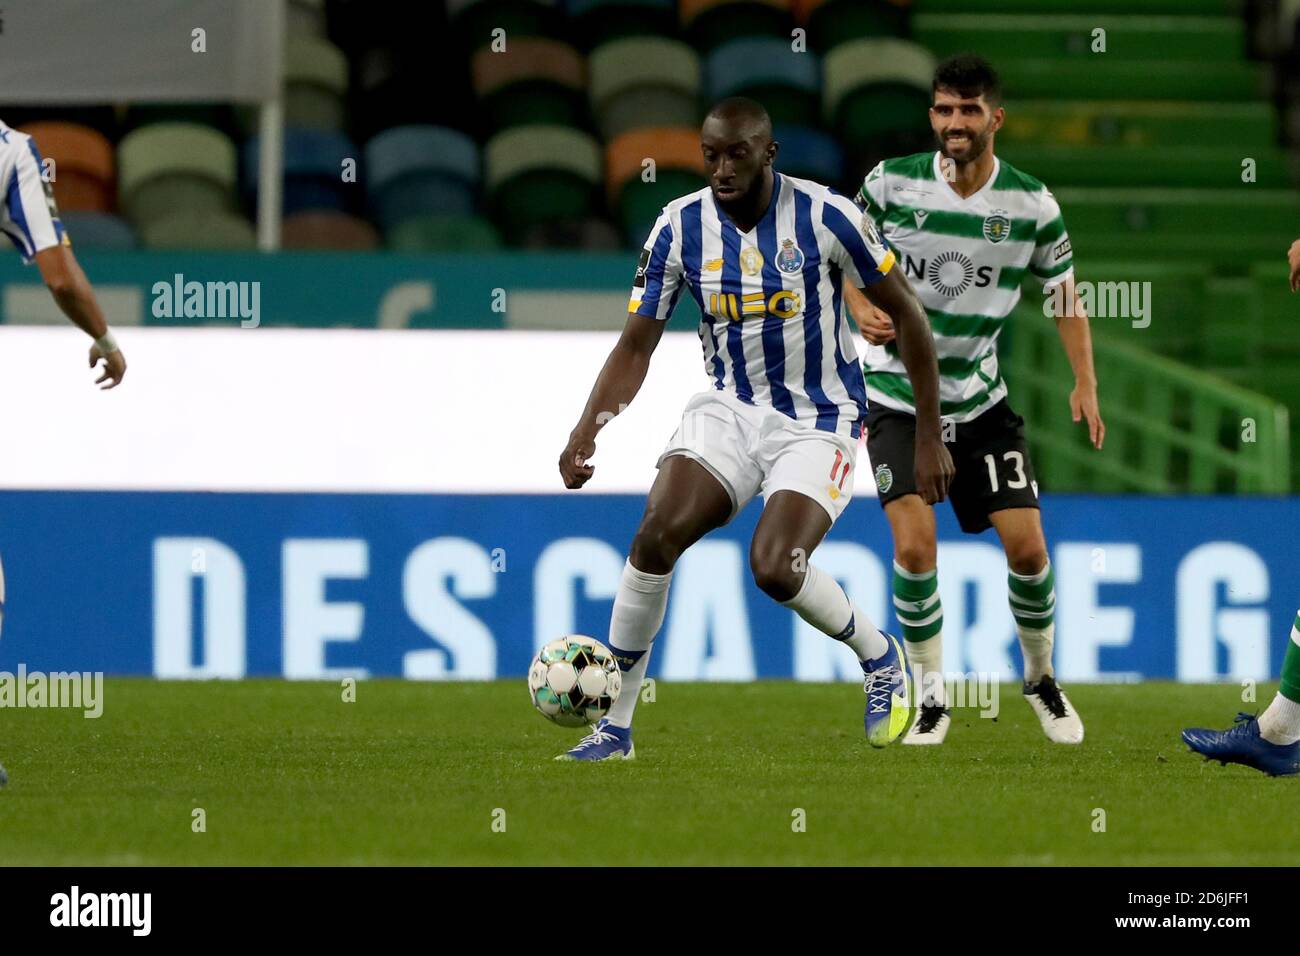 Lisbon, Portugal. 17th Oct, 2020. Marega of FC Porto (L) vies with Luis Neto of Sporting CP during the Portuguese League football match between Sporting CP and FC Porto at Jose Alvalade stadium in Lisbon, Portugal on October 17, 2020. Credit: Pedro Fiuza/ZUMA Wire/Alamy Live News Stock Photo